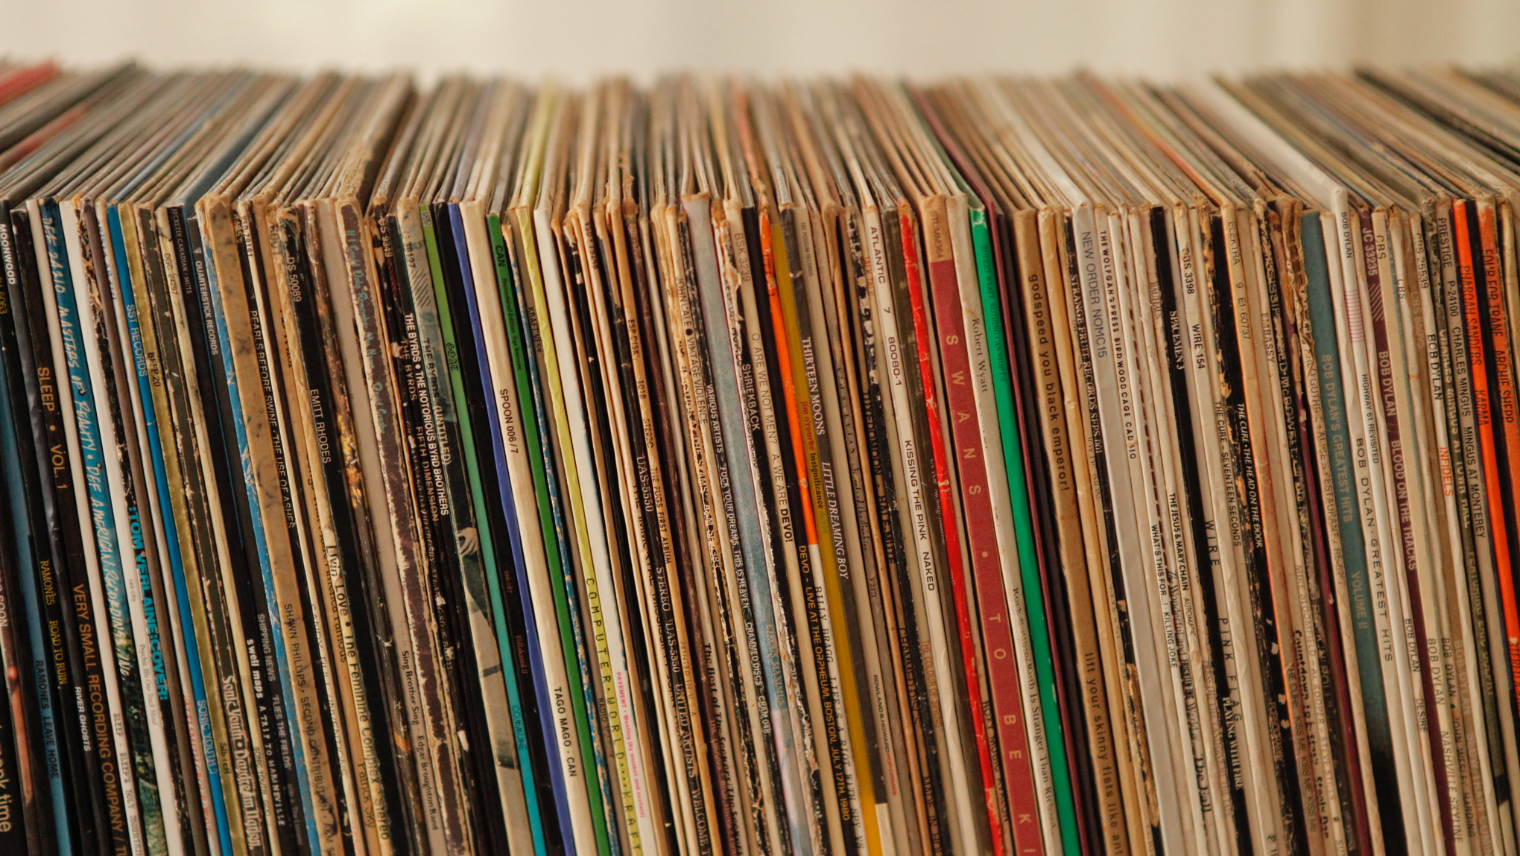 An image of multiple records stacked next to each other